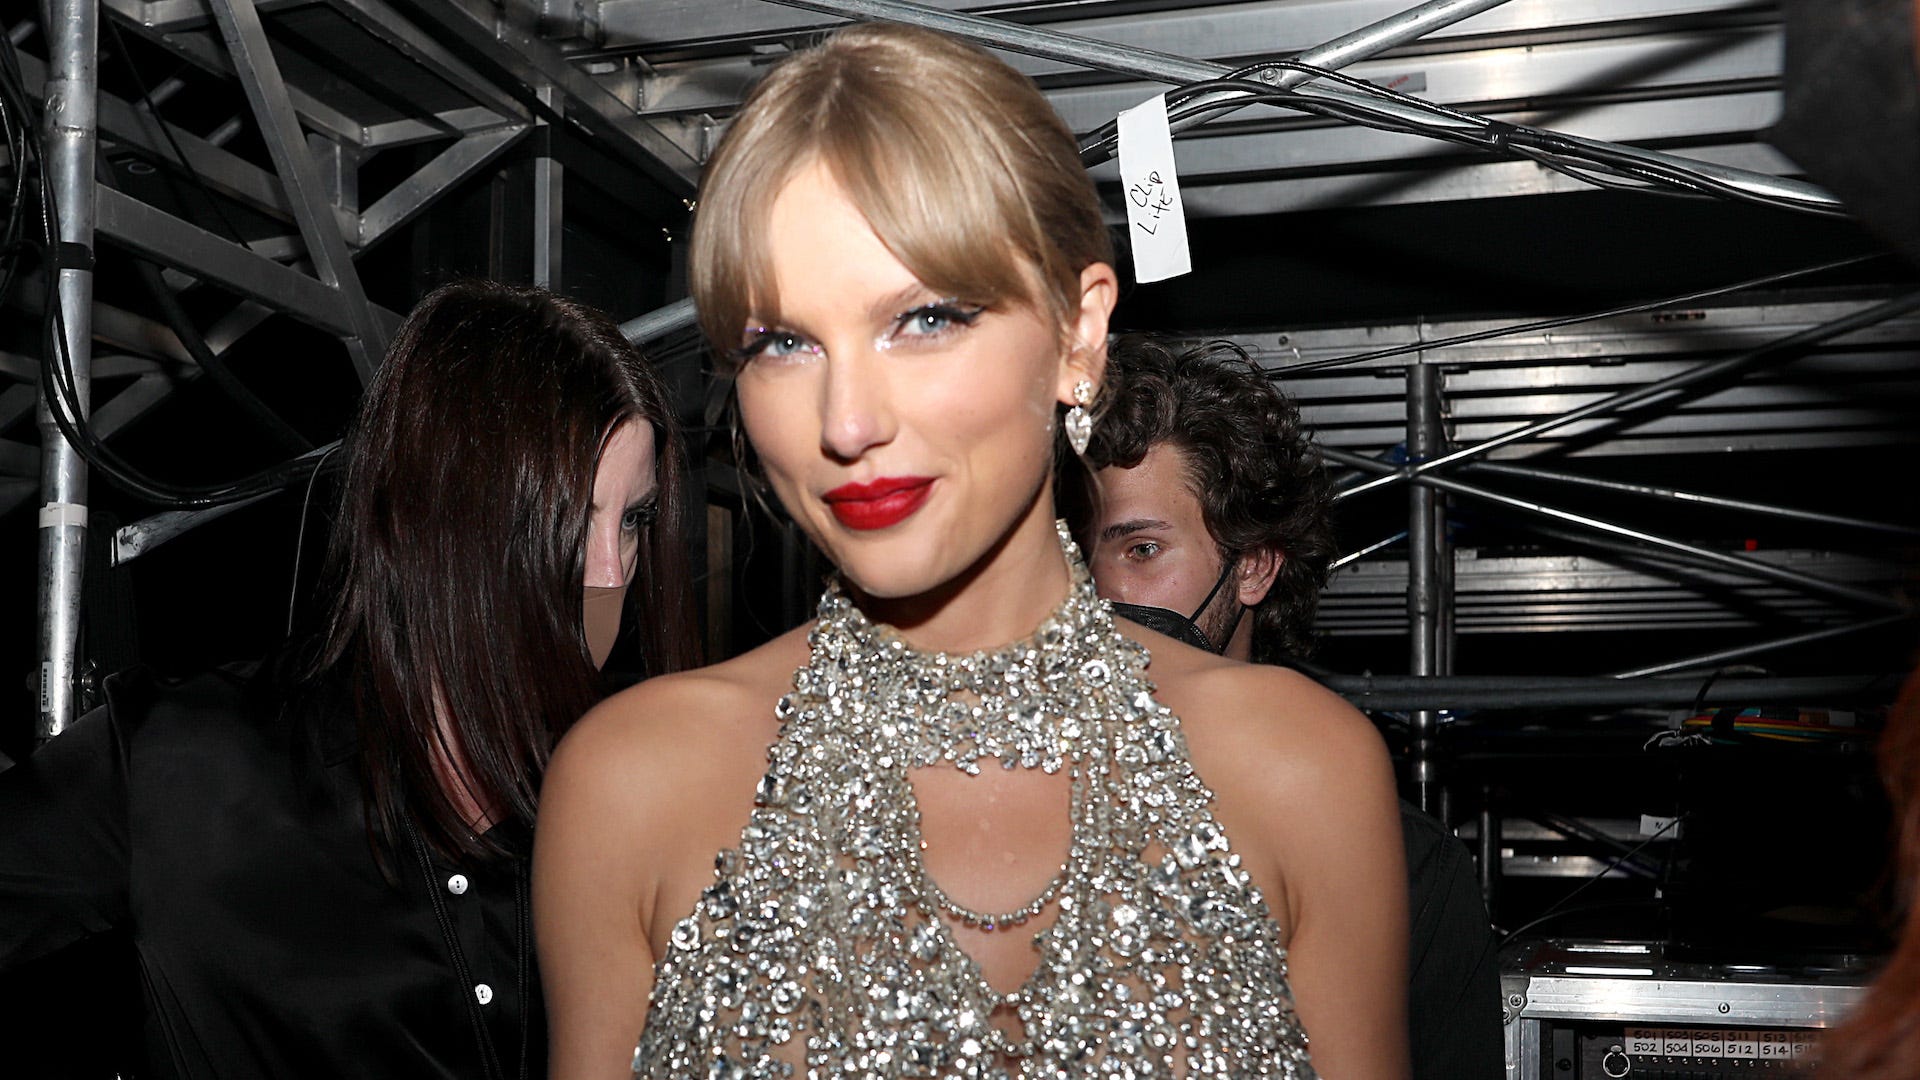 Taylor Swift wears a silver bejeweled dress and red lipstick in the Grammys press room - Taylor Swift